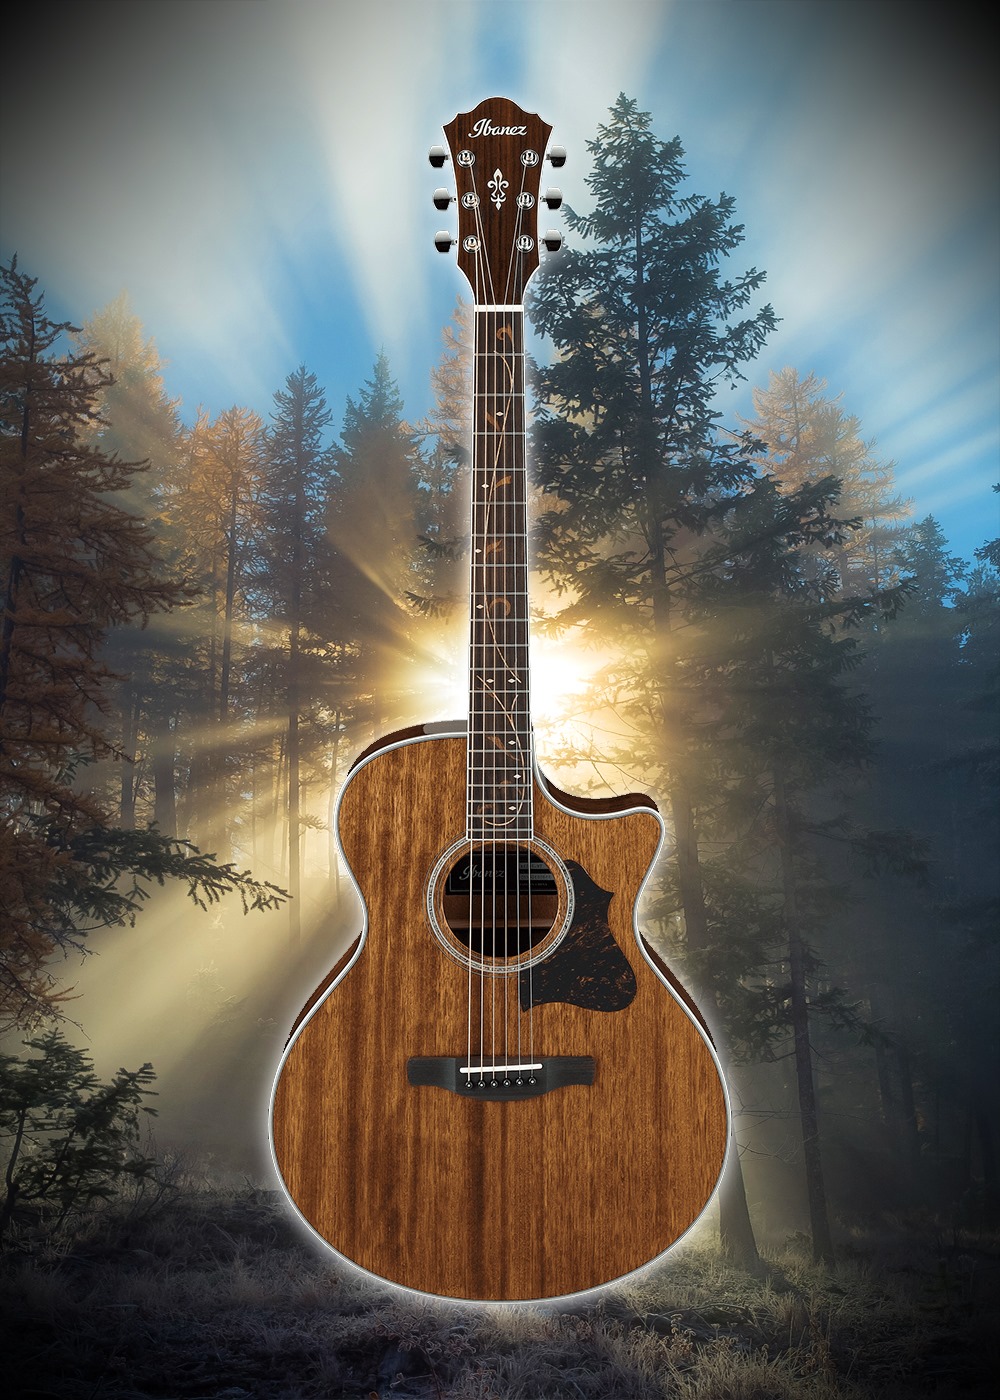 The Ibanez Ae245 Nt Acoustic Electric Philippines